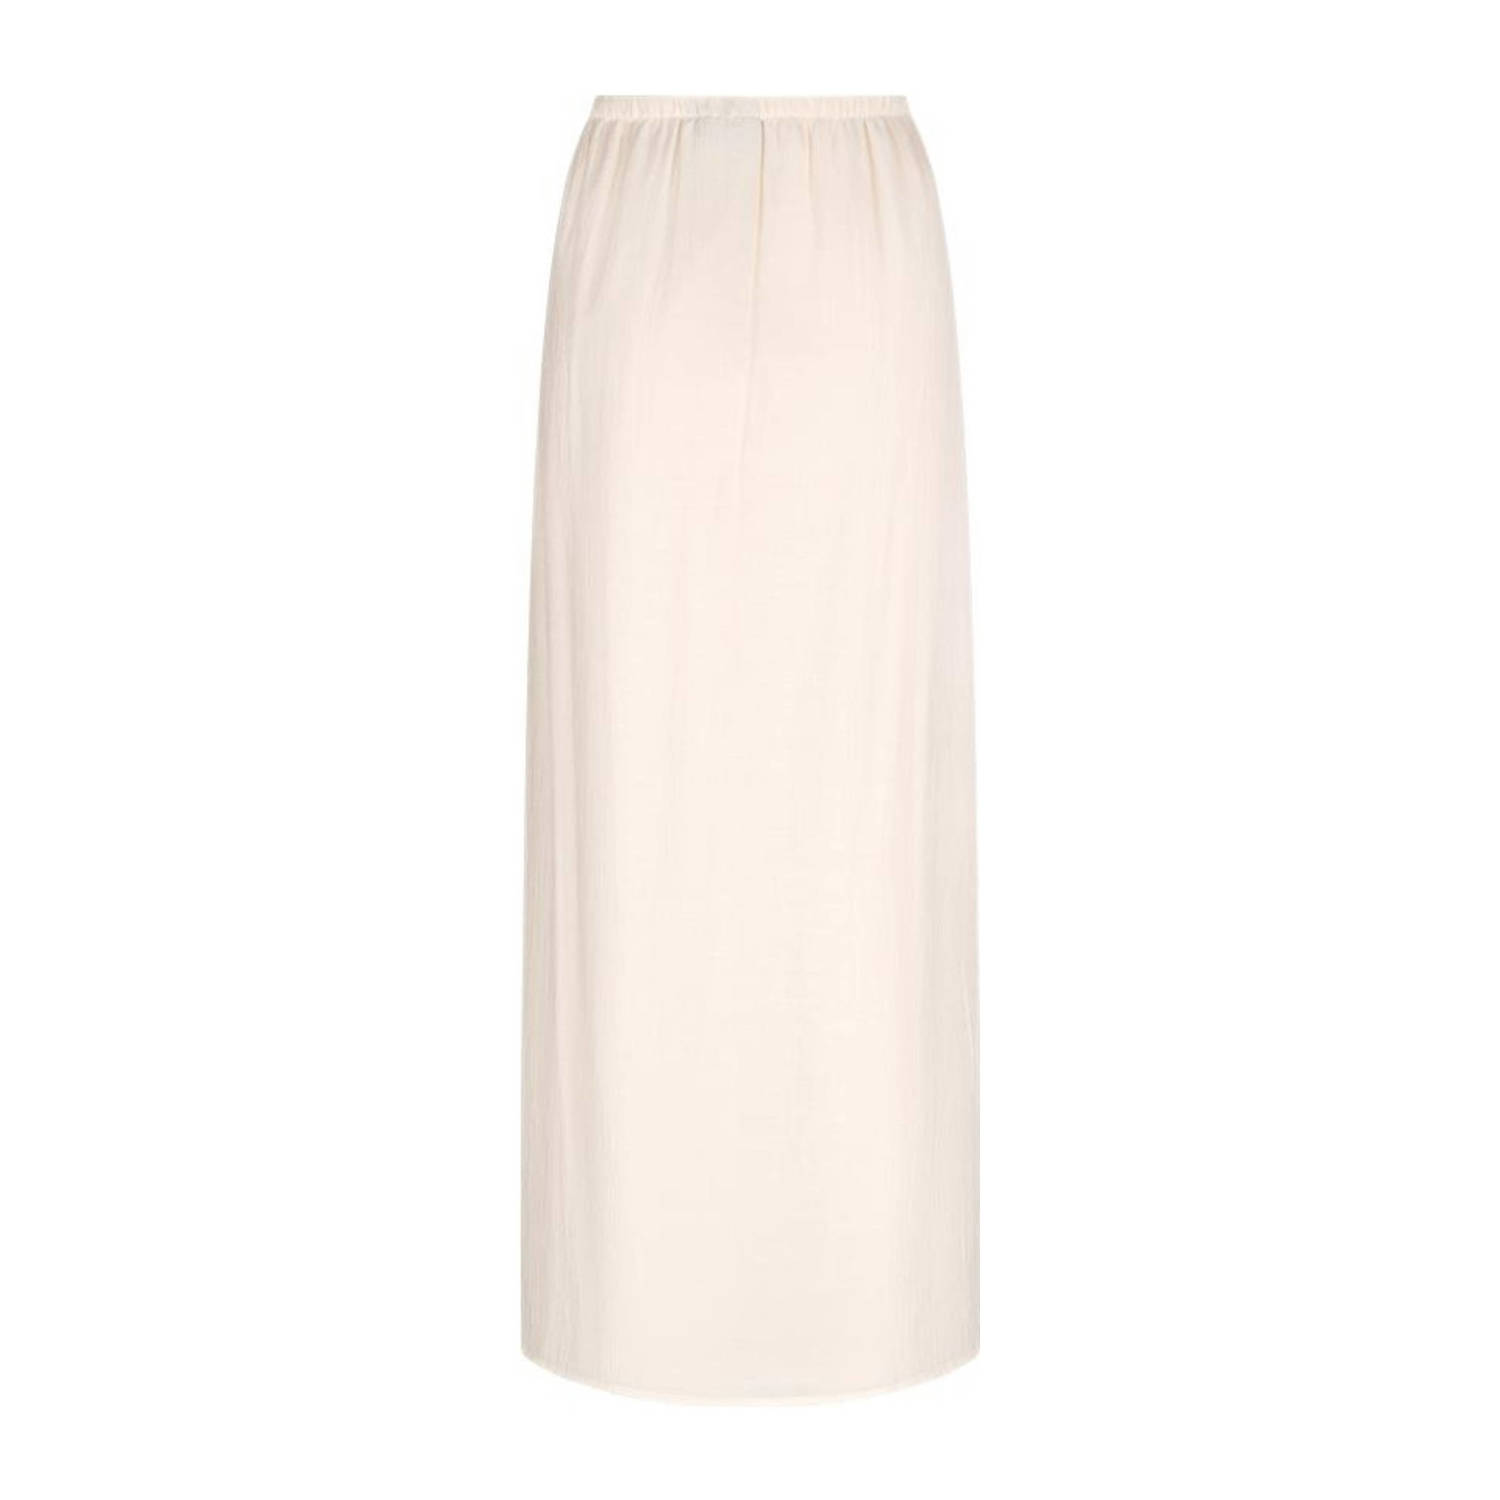 Another-Label maxi rok zand